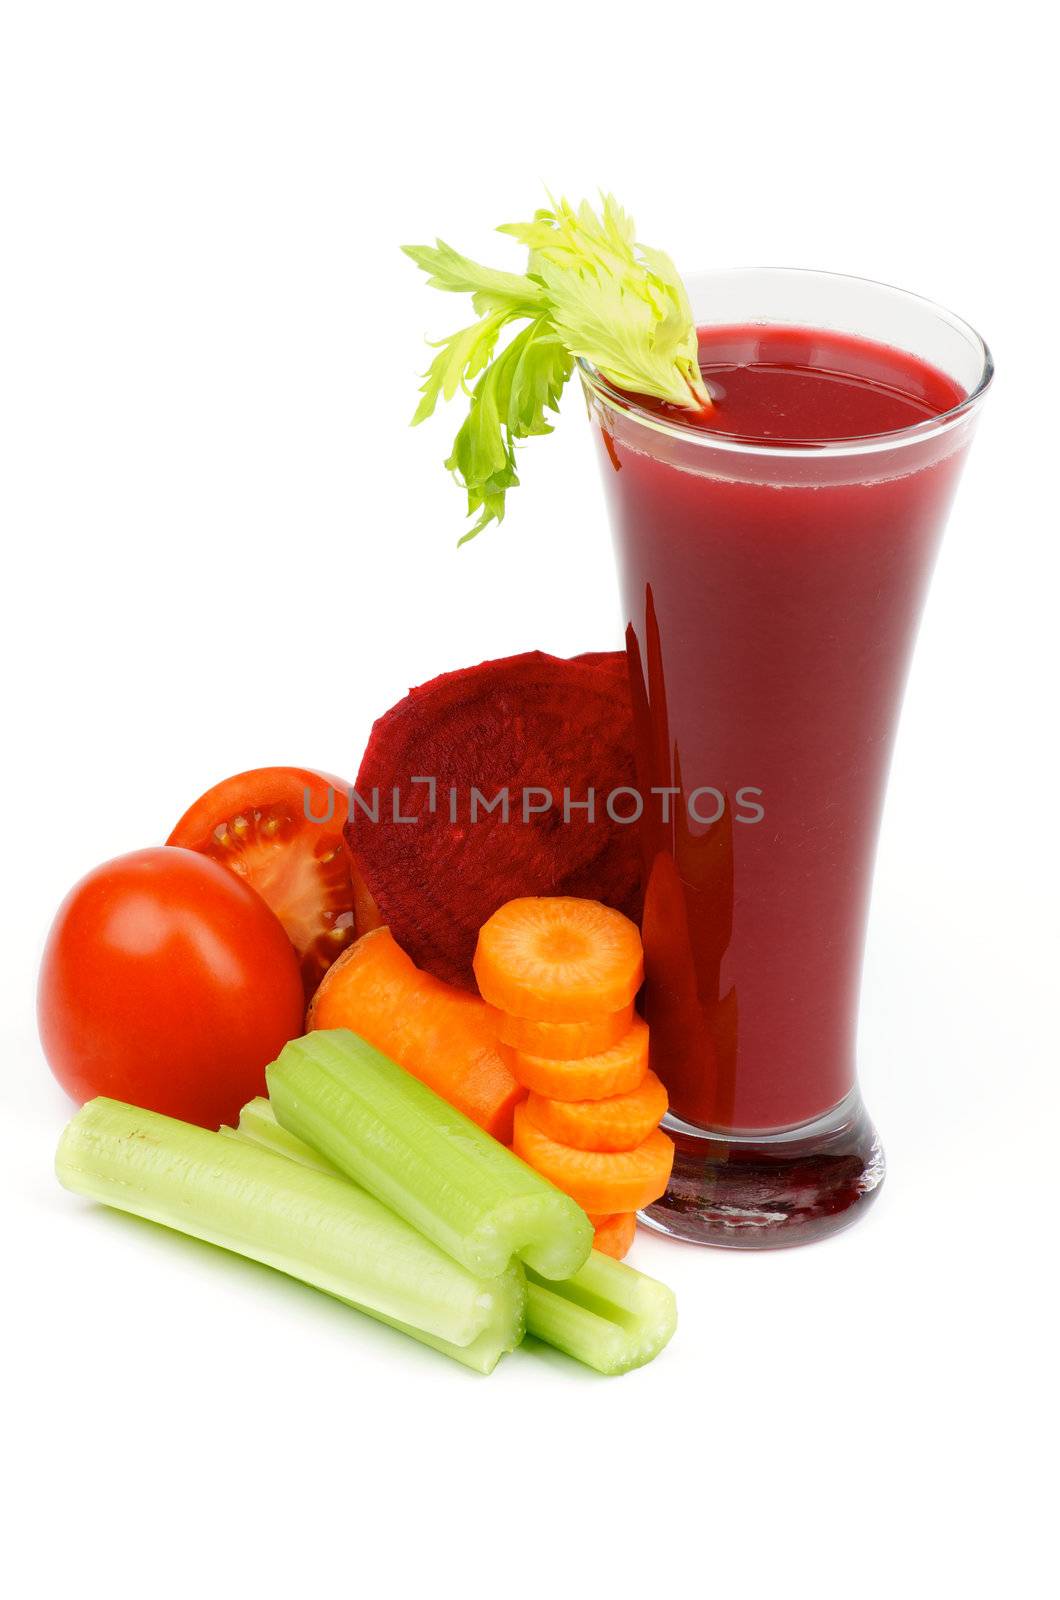 Arrangement of Beet, Carrot, Tomatoes, Celery and High Glass of Vegetable Juice isolated on white background